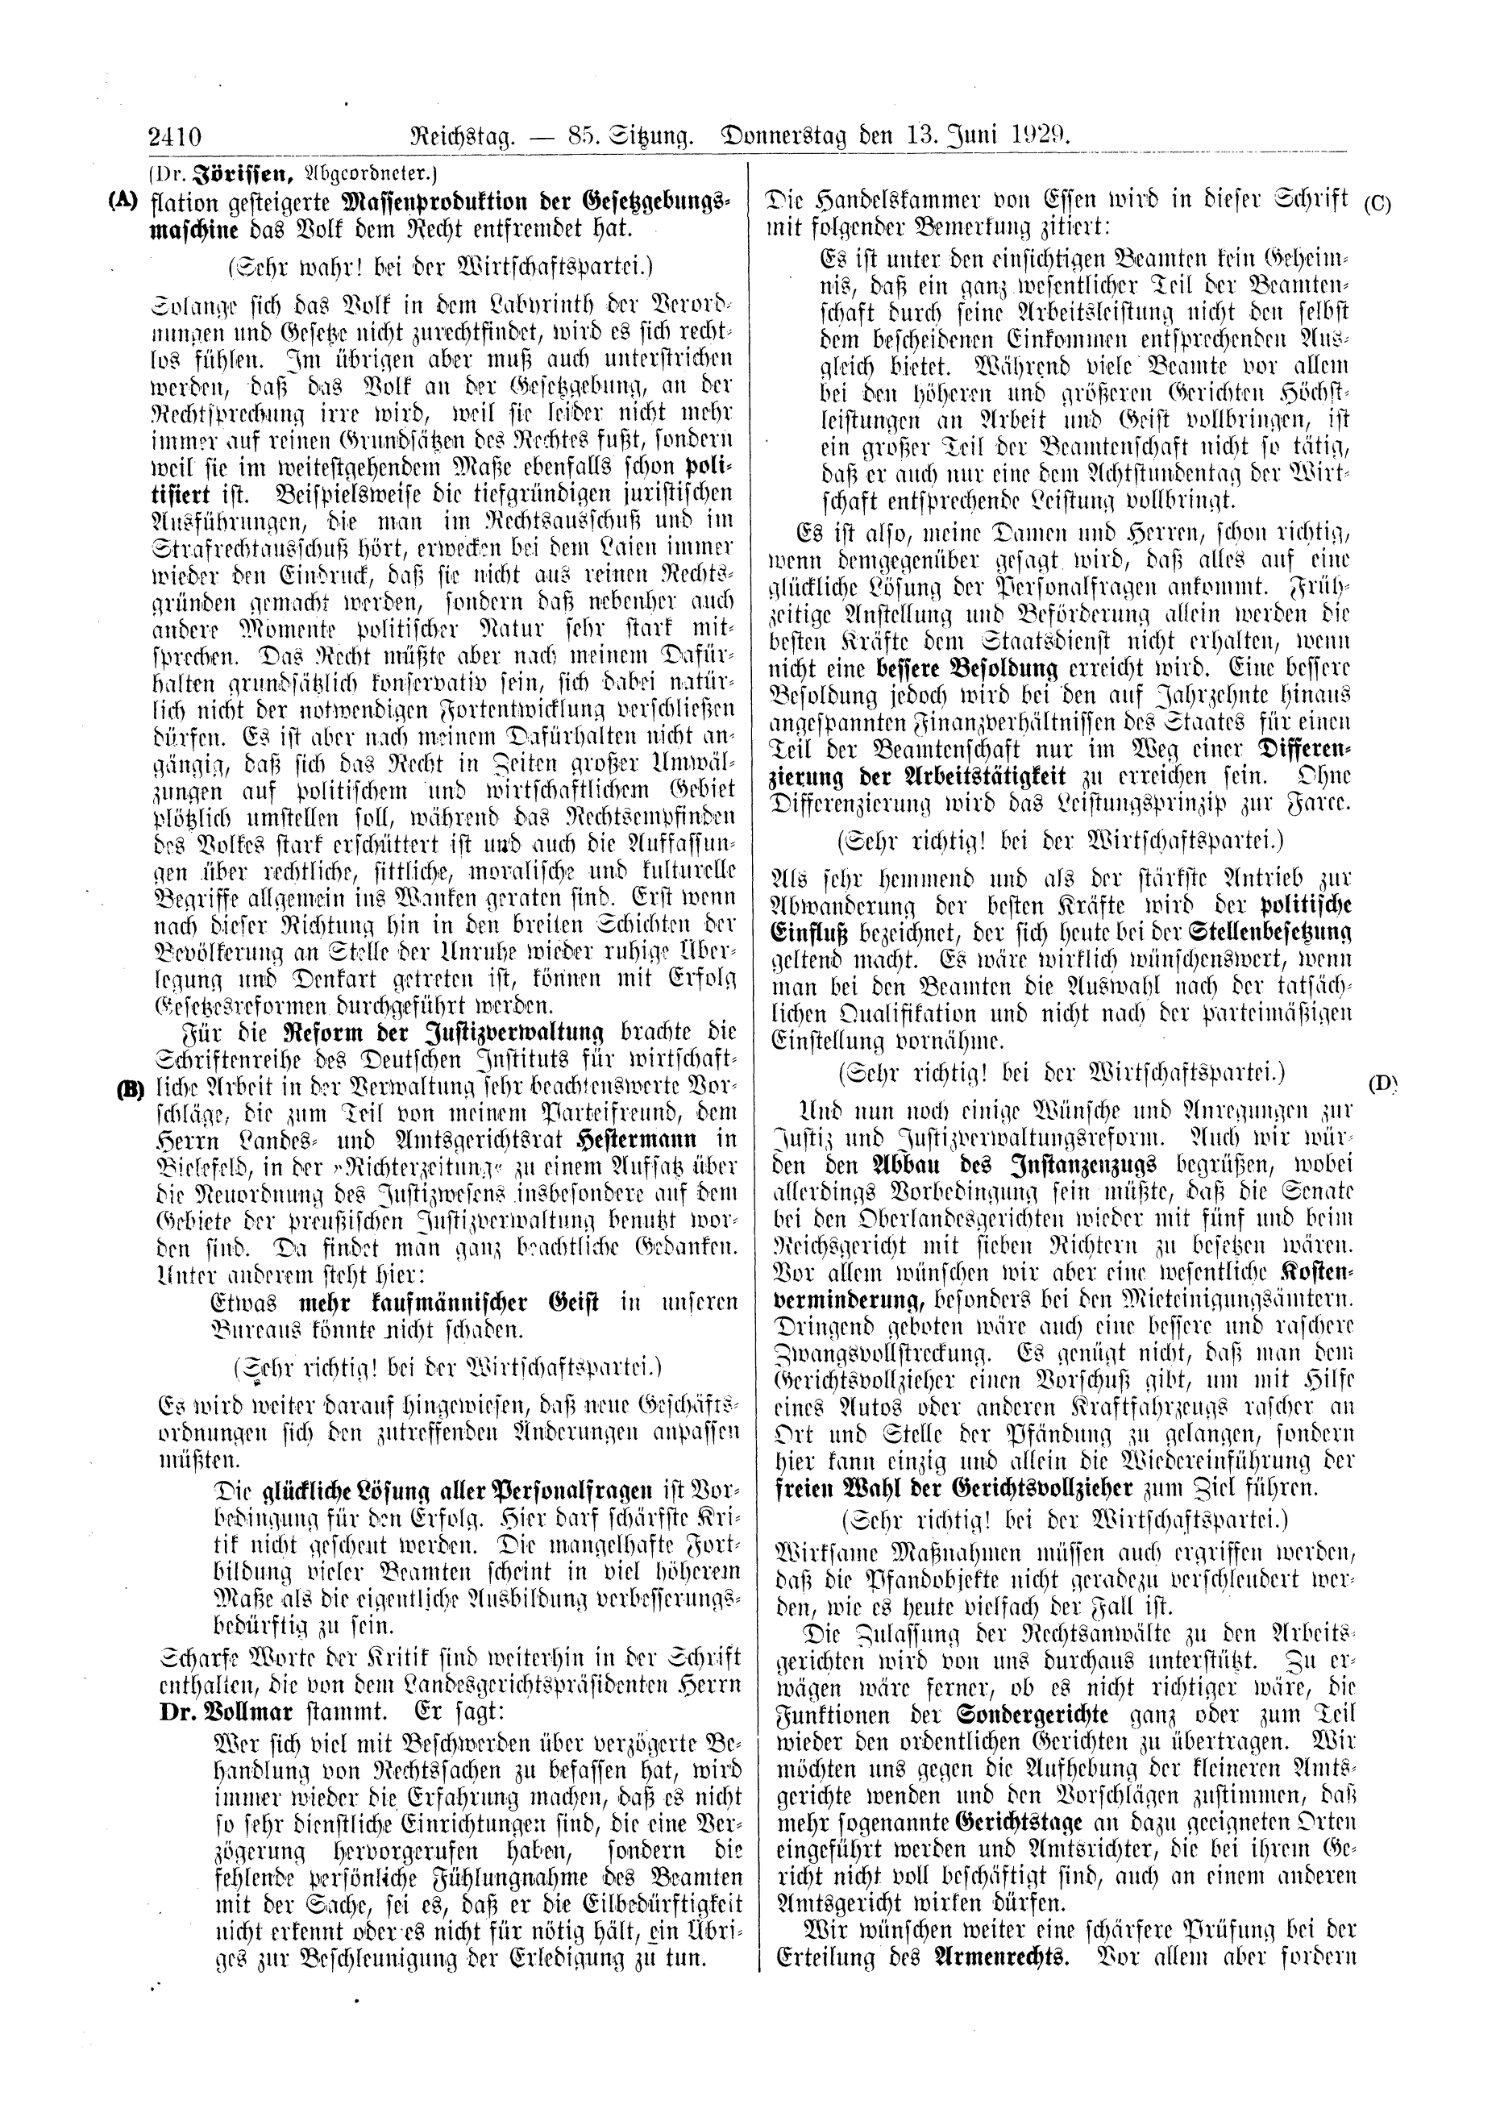 Scan of page 2410